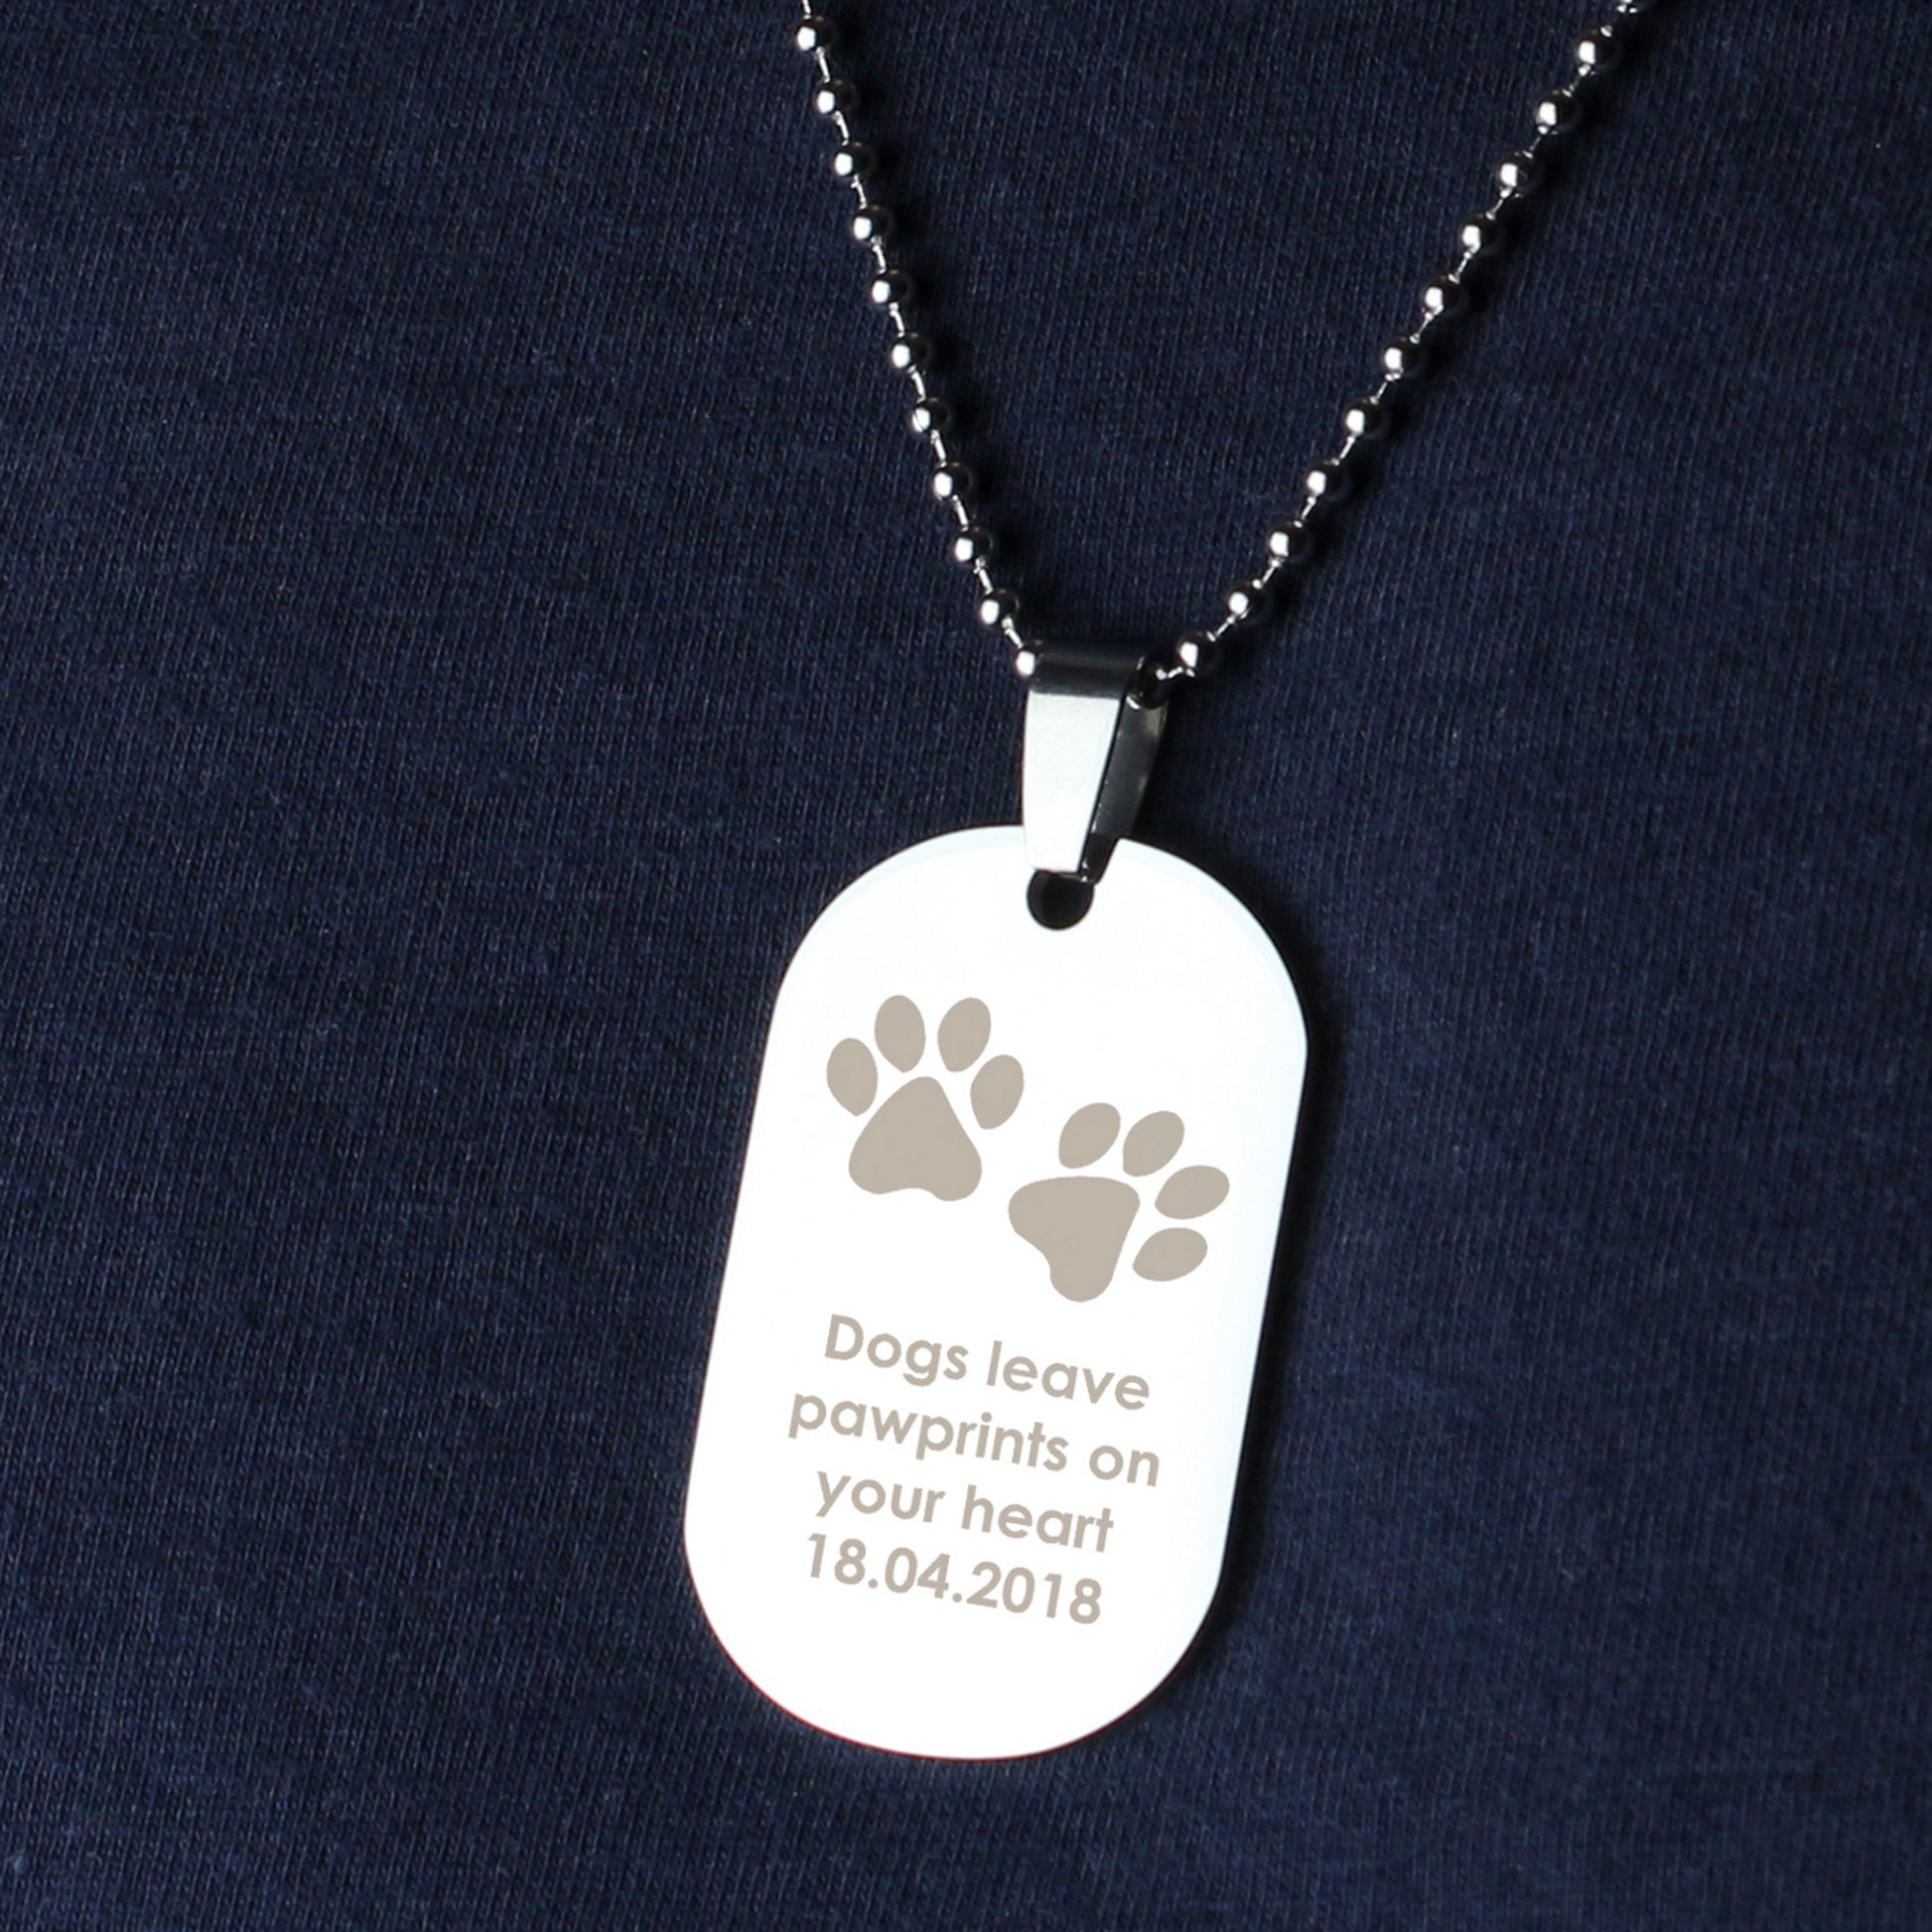 Personalised Paw Prints Dog Tag Necklace - Violet Belle Gifts - Personalised Paws Dog Tag Necklace